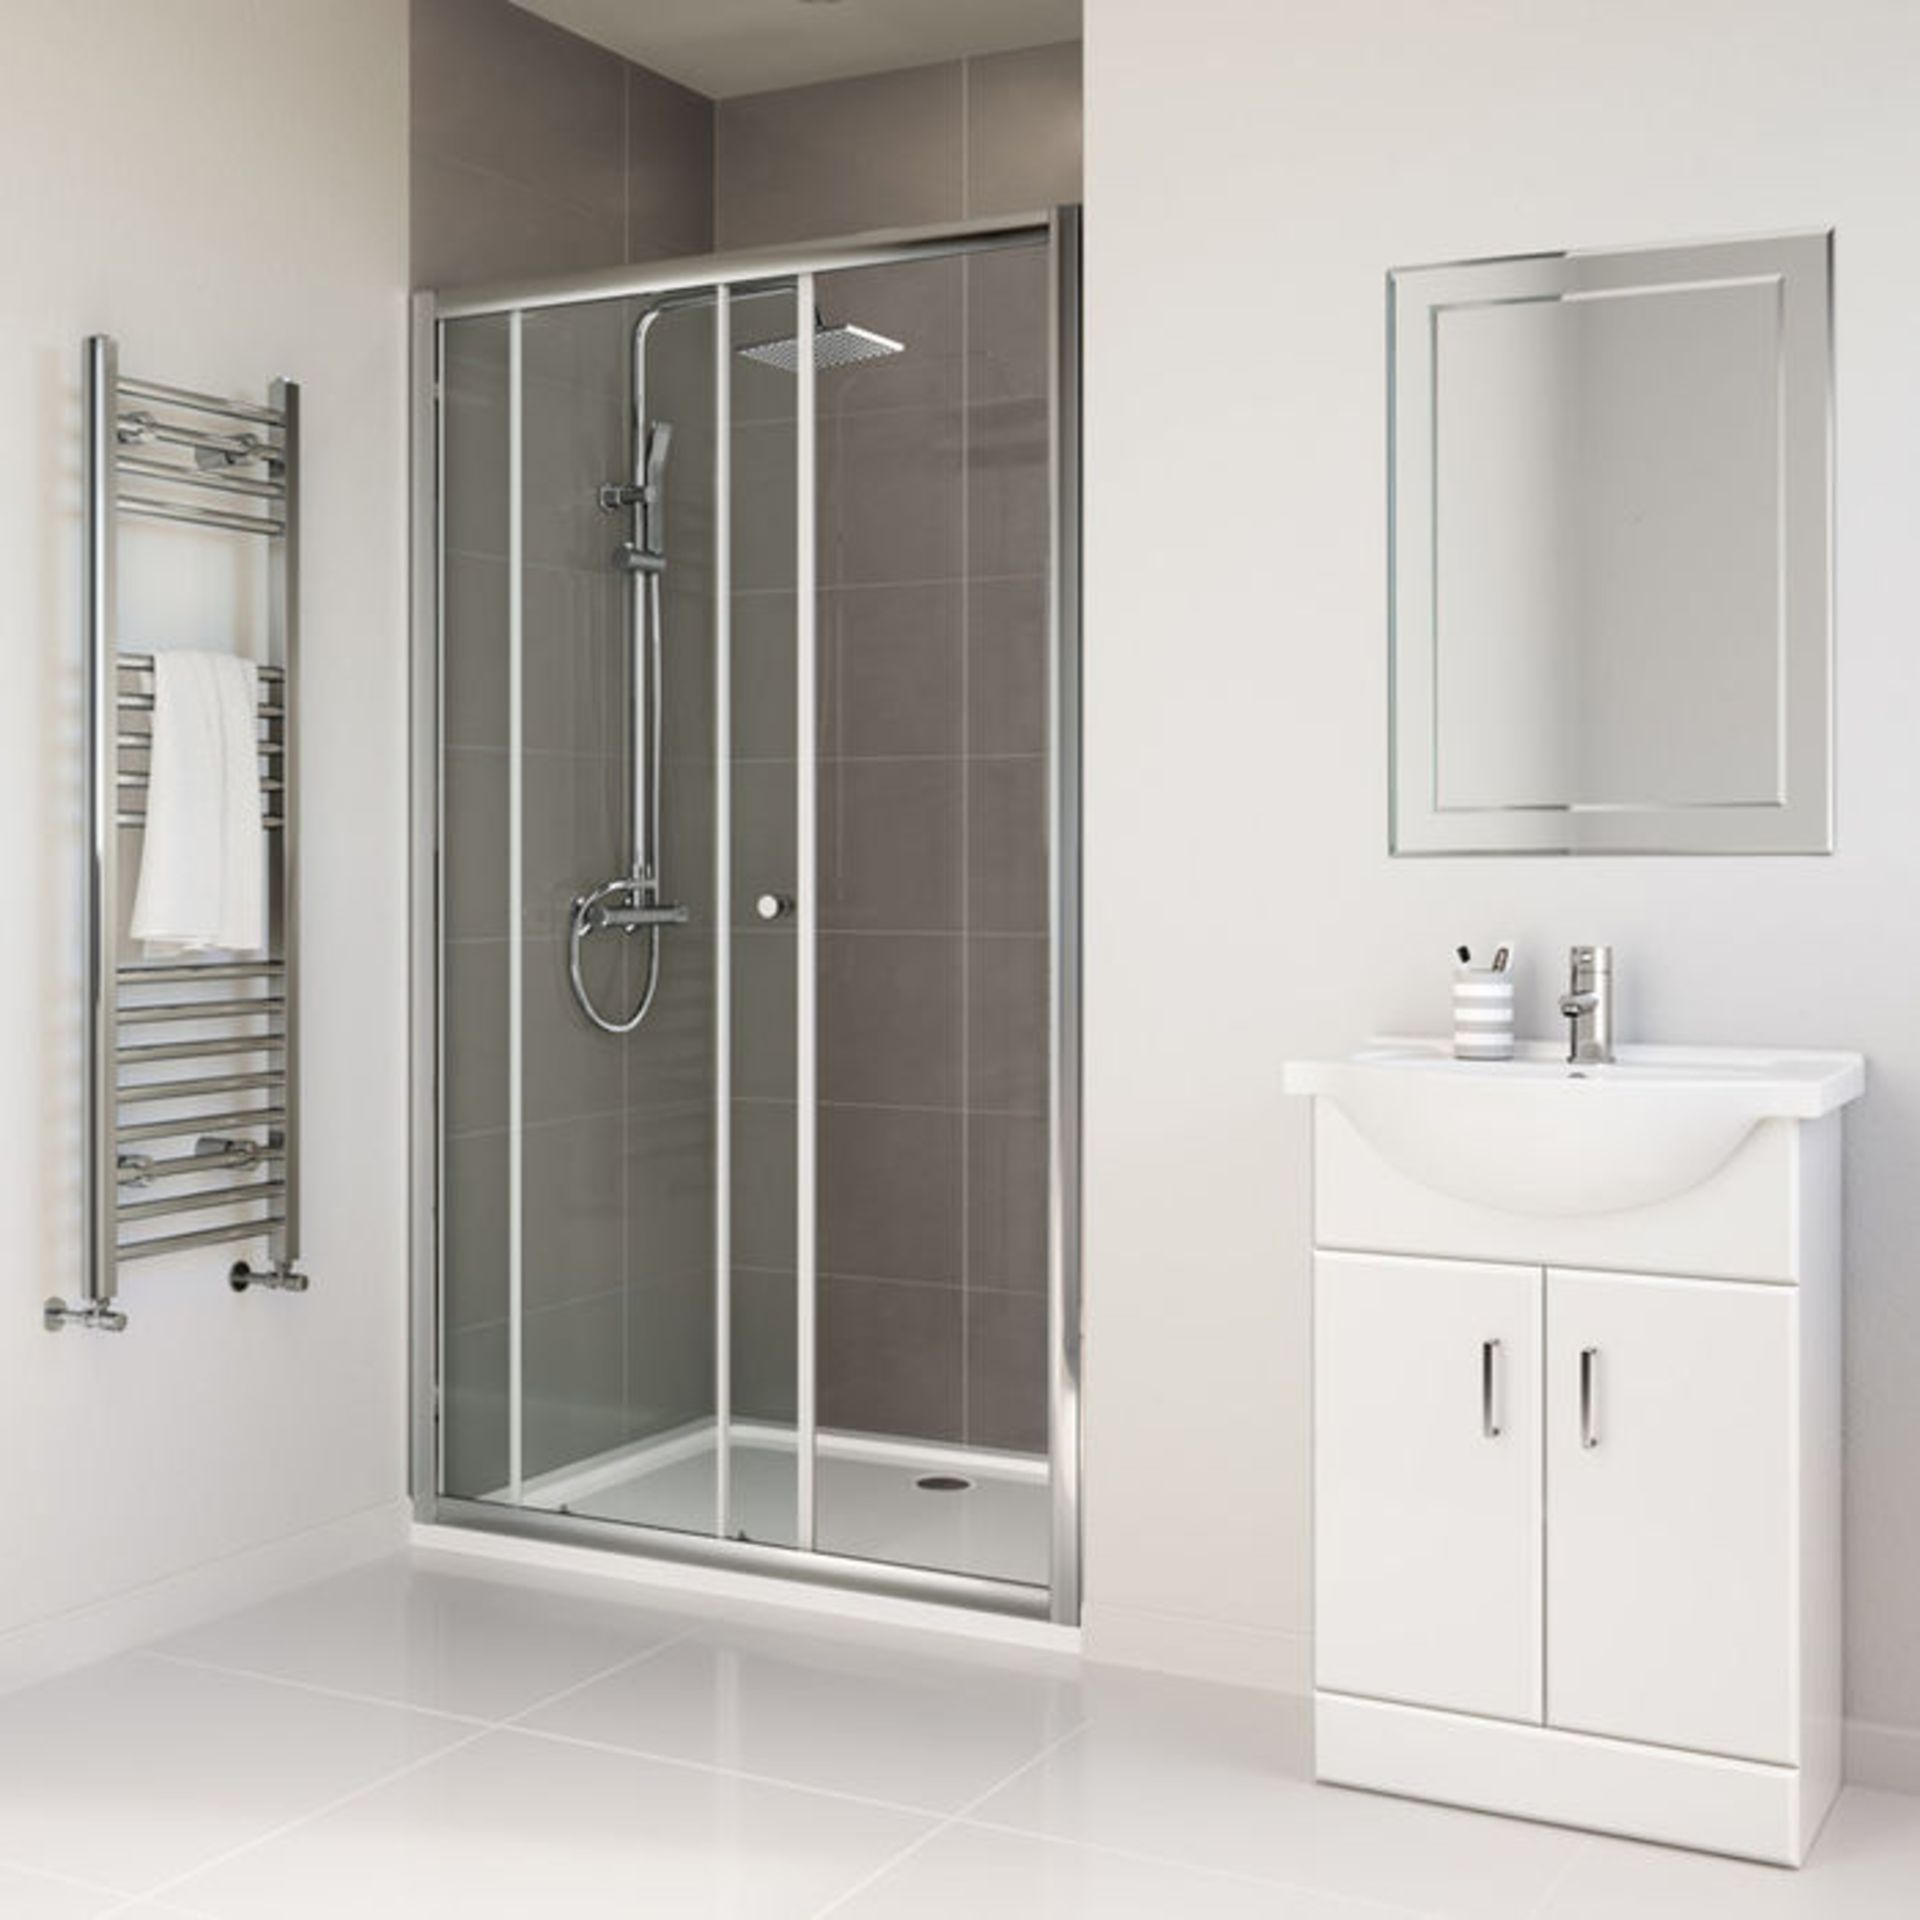 (M29) 1200mm - Elements Sliding Shower Door. RRP £299.99. 4mm Safety Glass Fully waterproof tested - Image 4 of 6